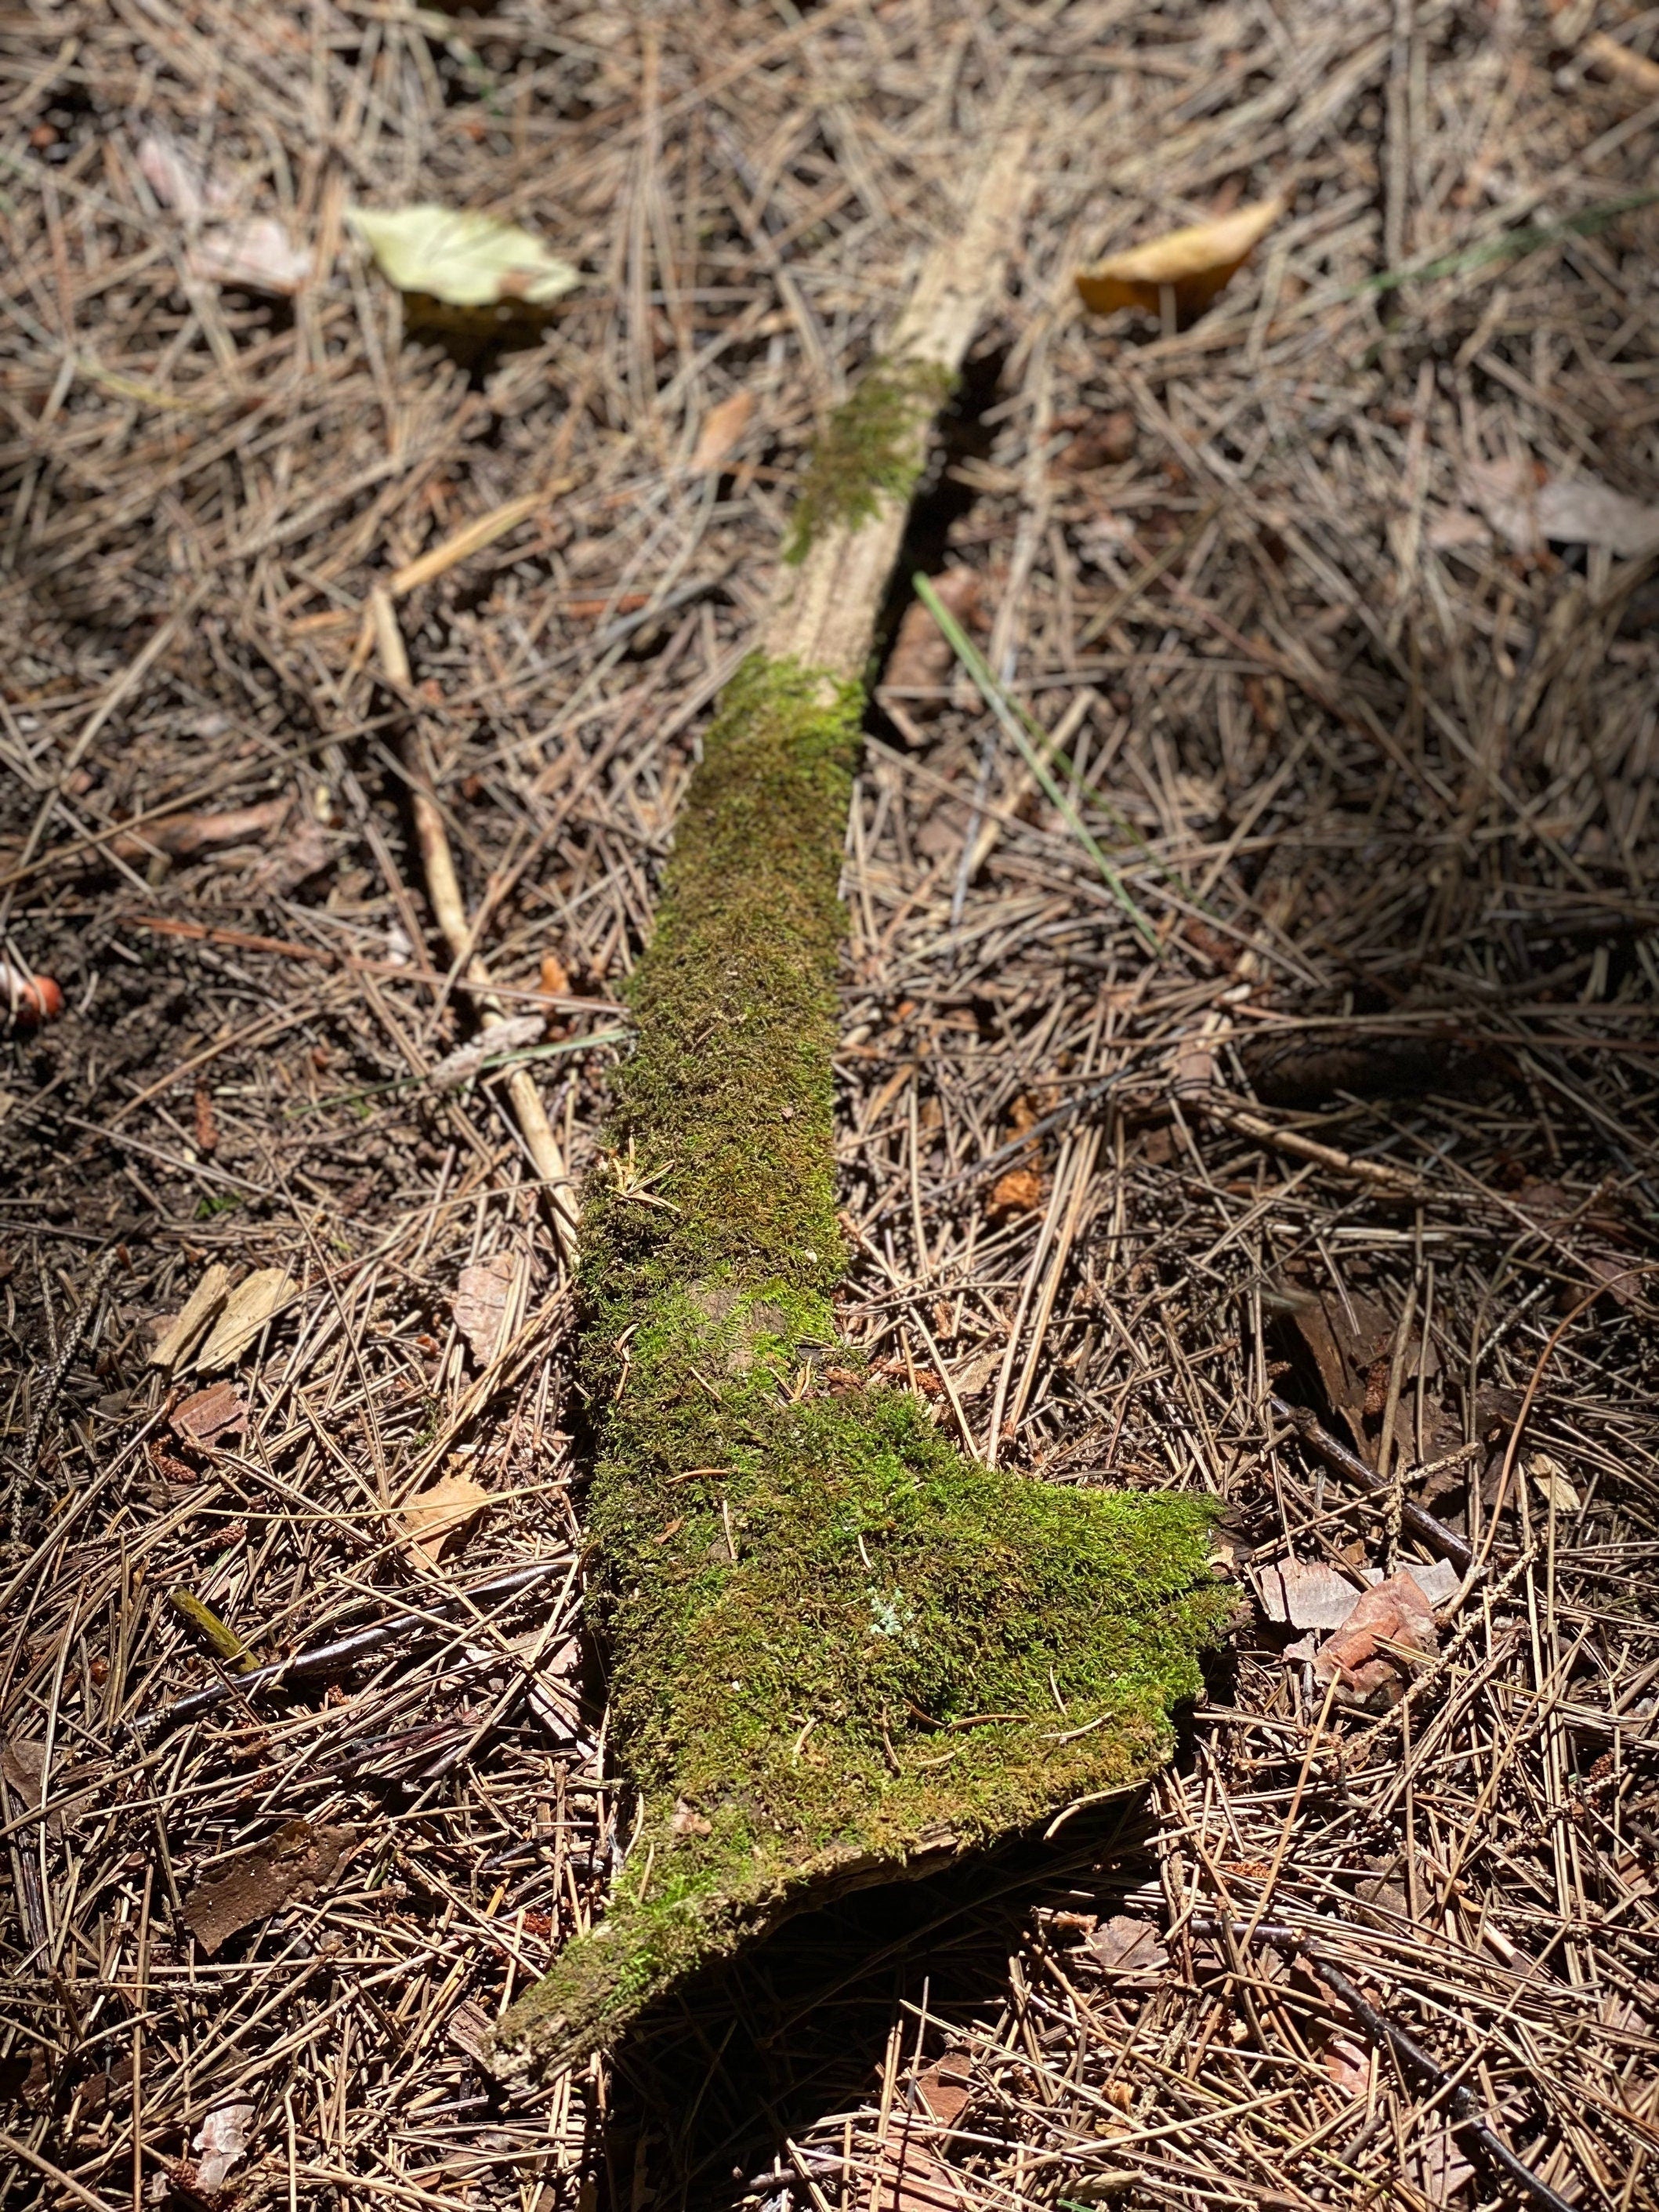 Moss Covered Log, Mossy Log, 18 Inches Long by 5 Inches Wide and 2.5 Inches High